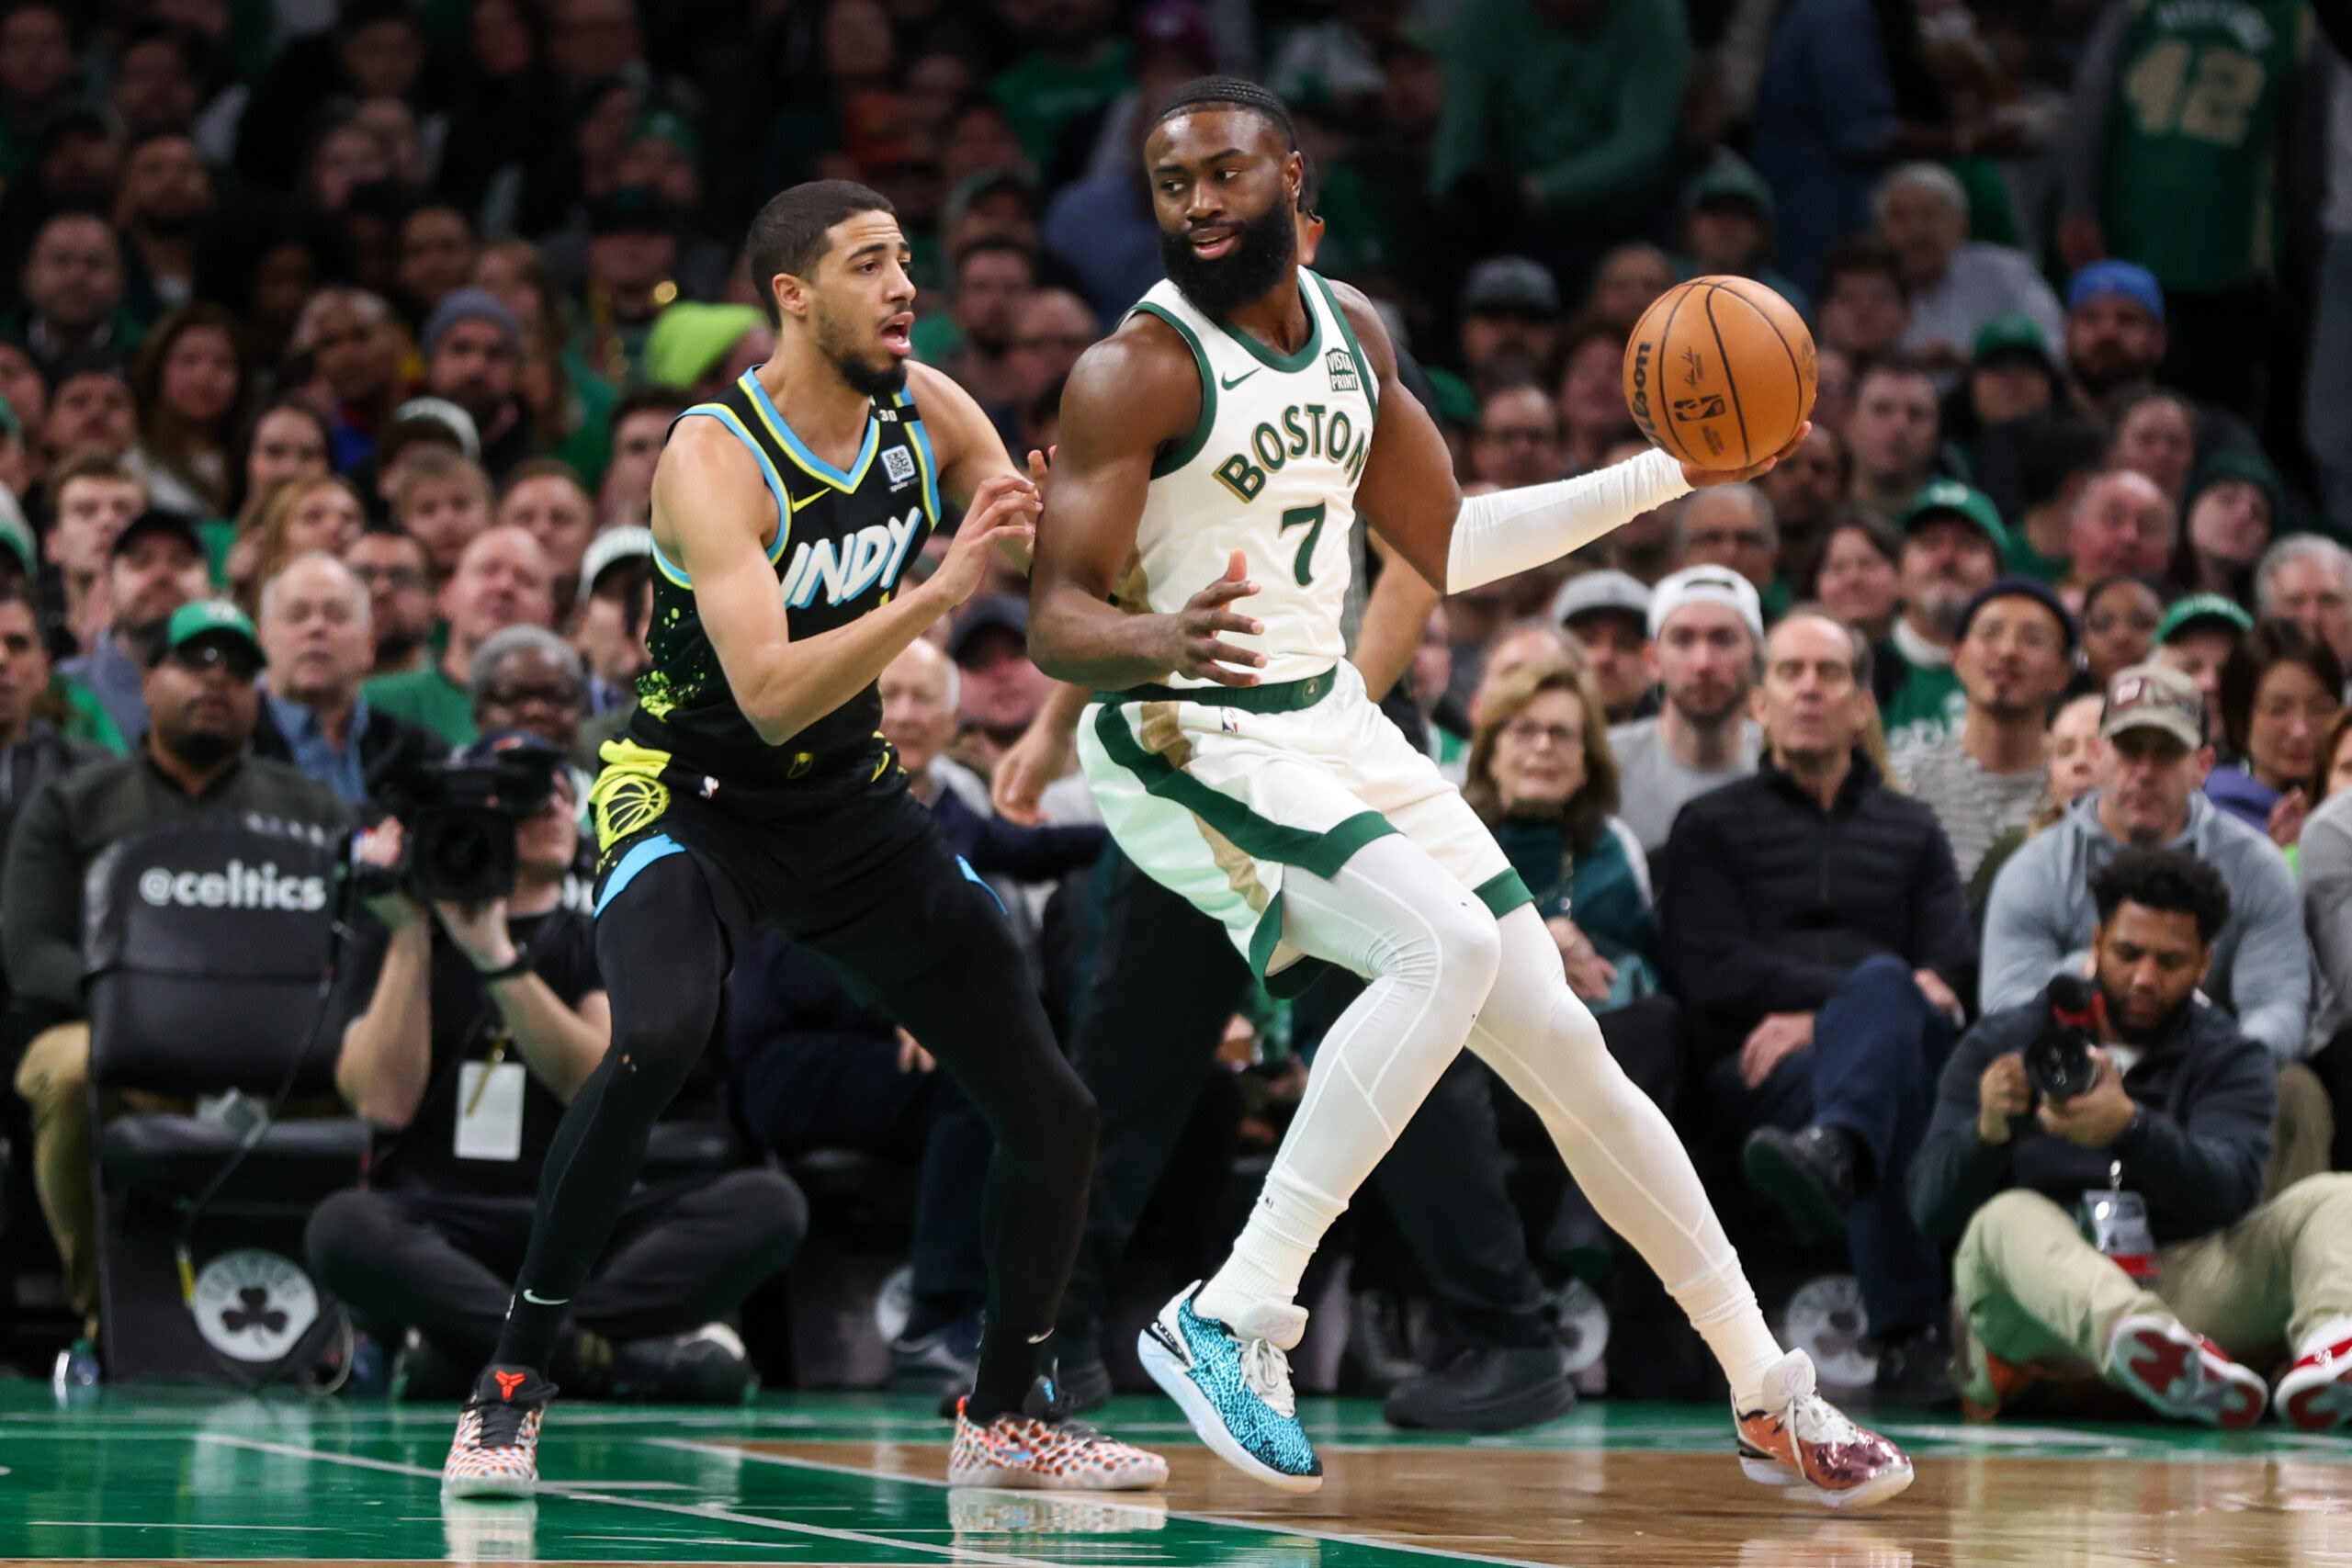 The Indiana Pacers are a real test for the Boston Celtics